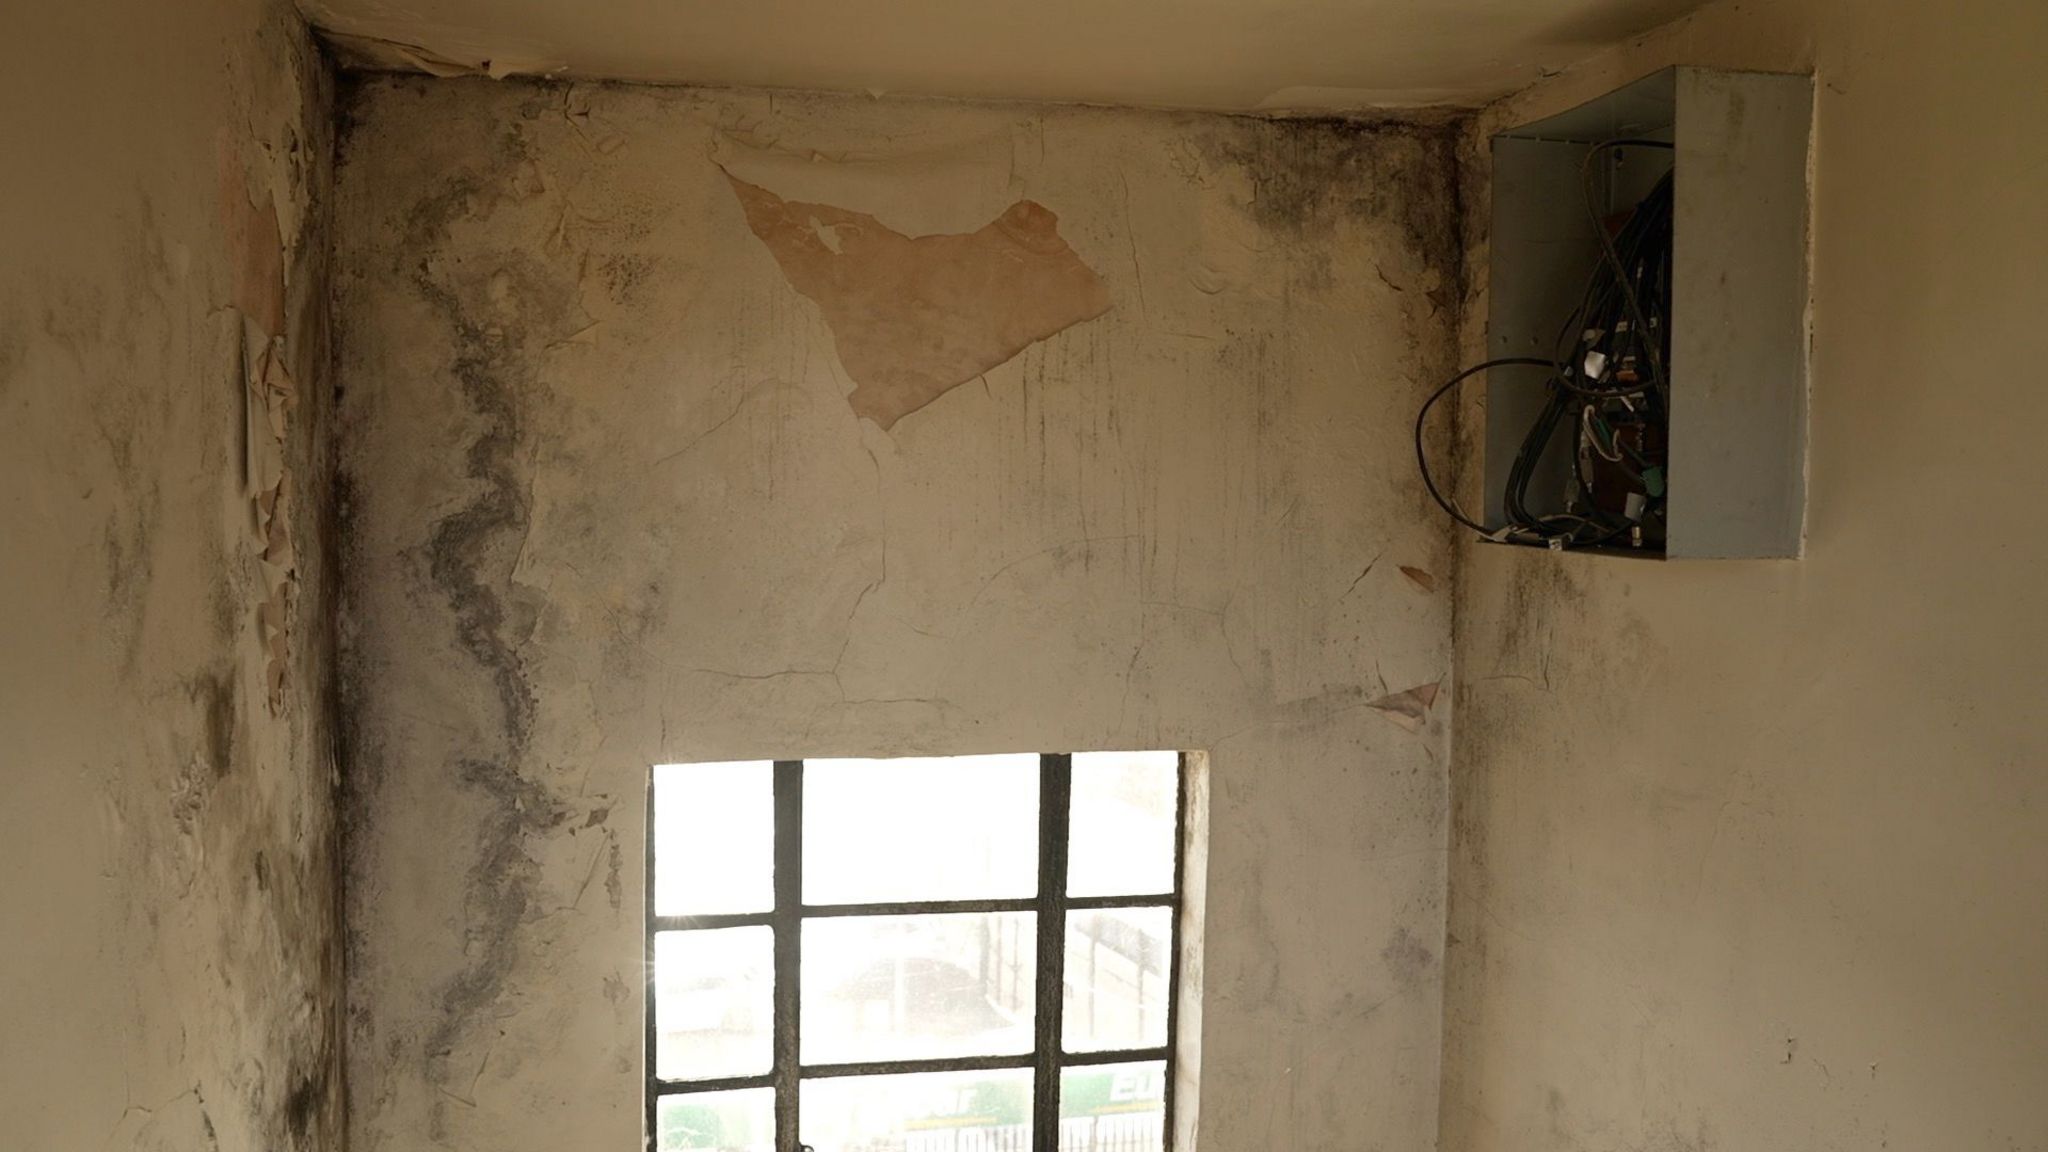 A window surrounded by mould and mildew with paint peeling from the wall